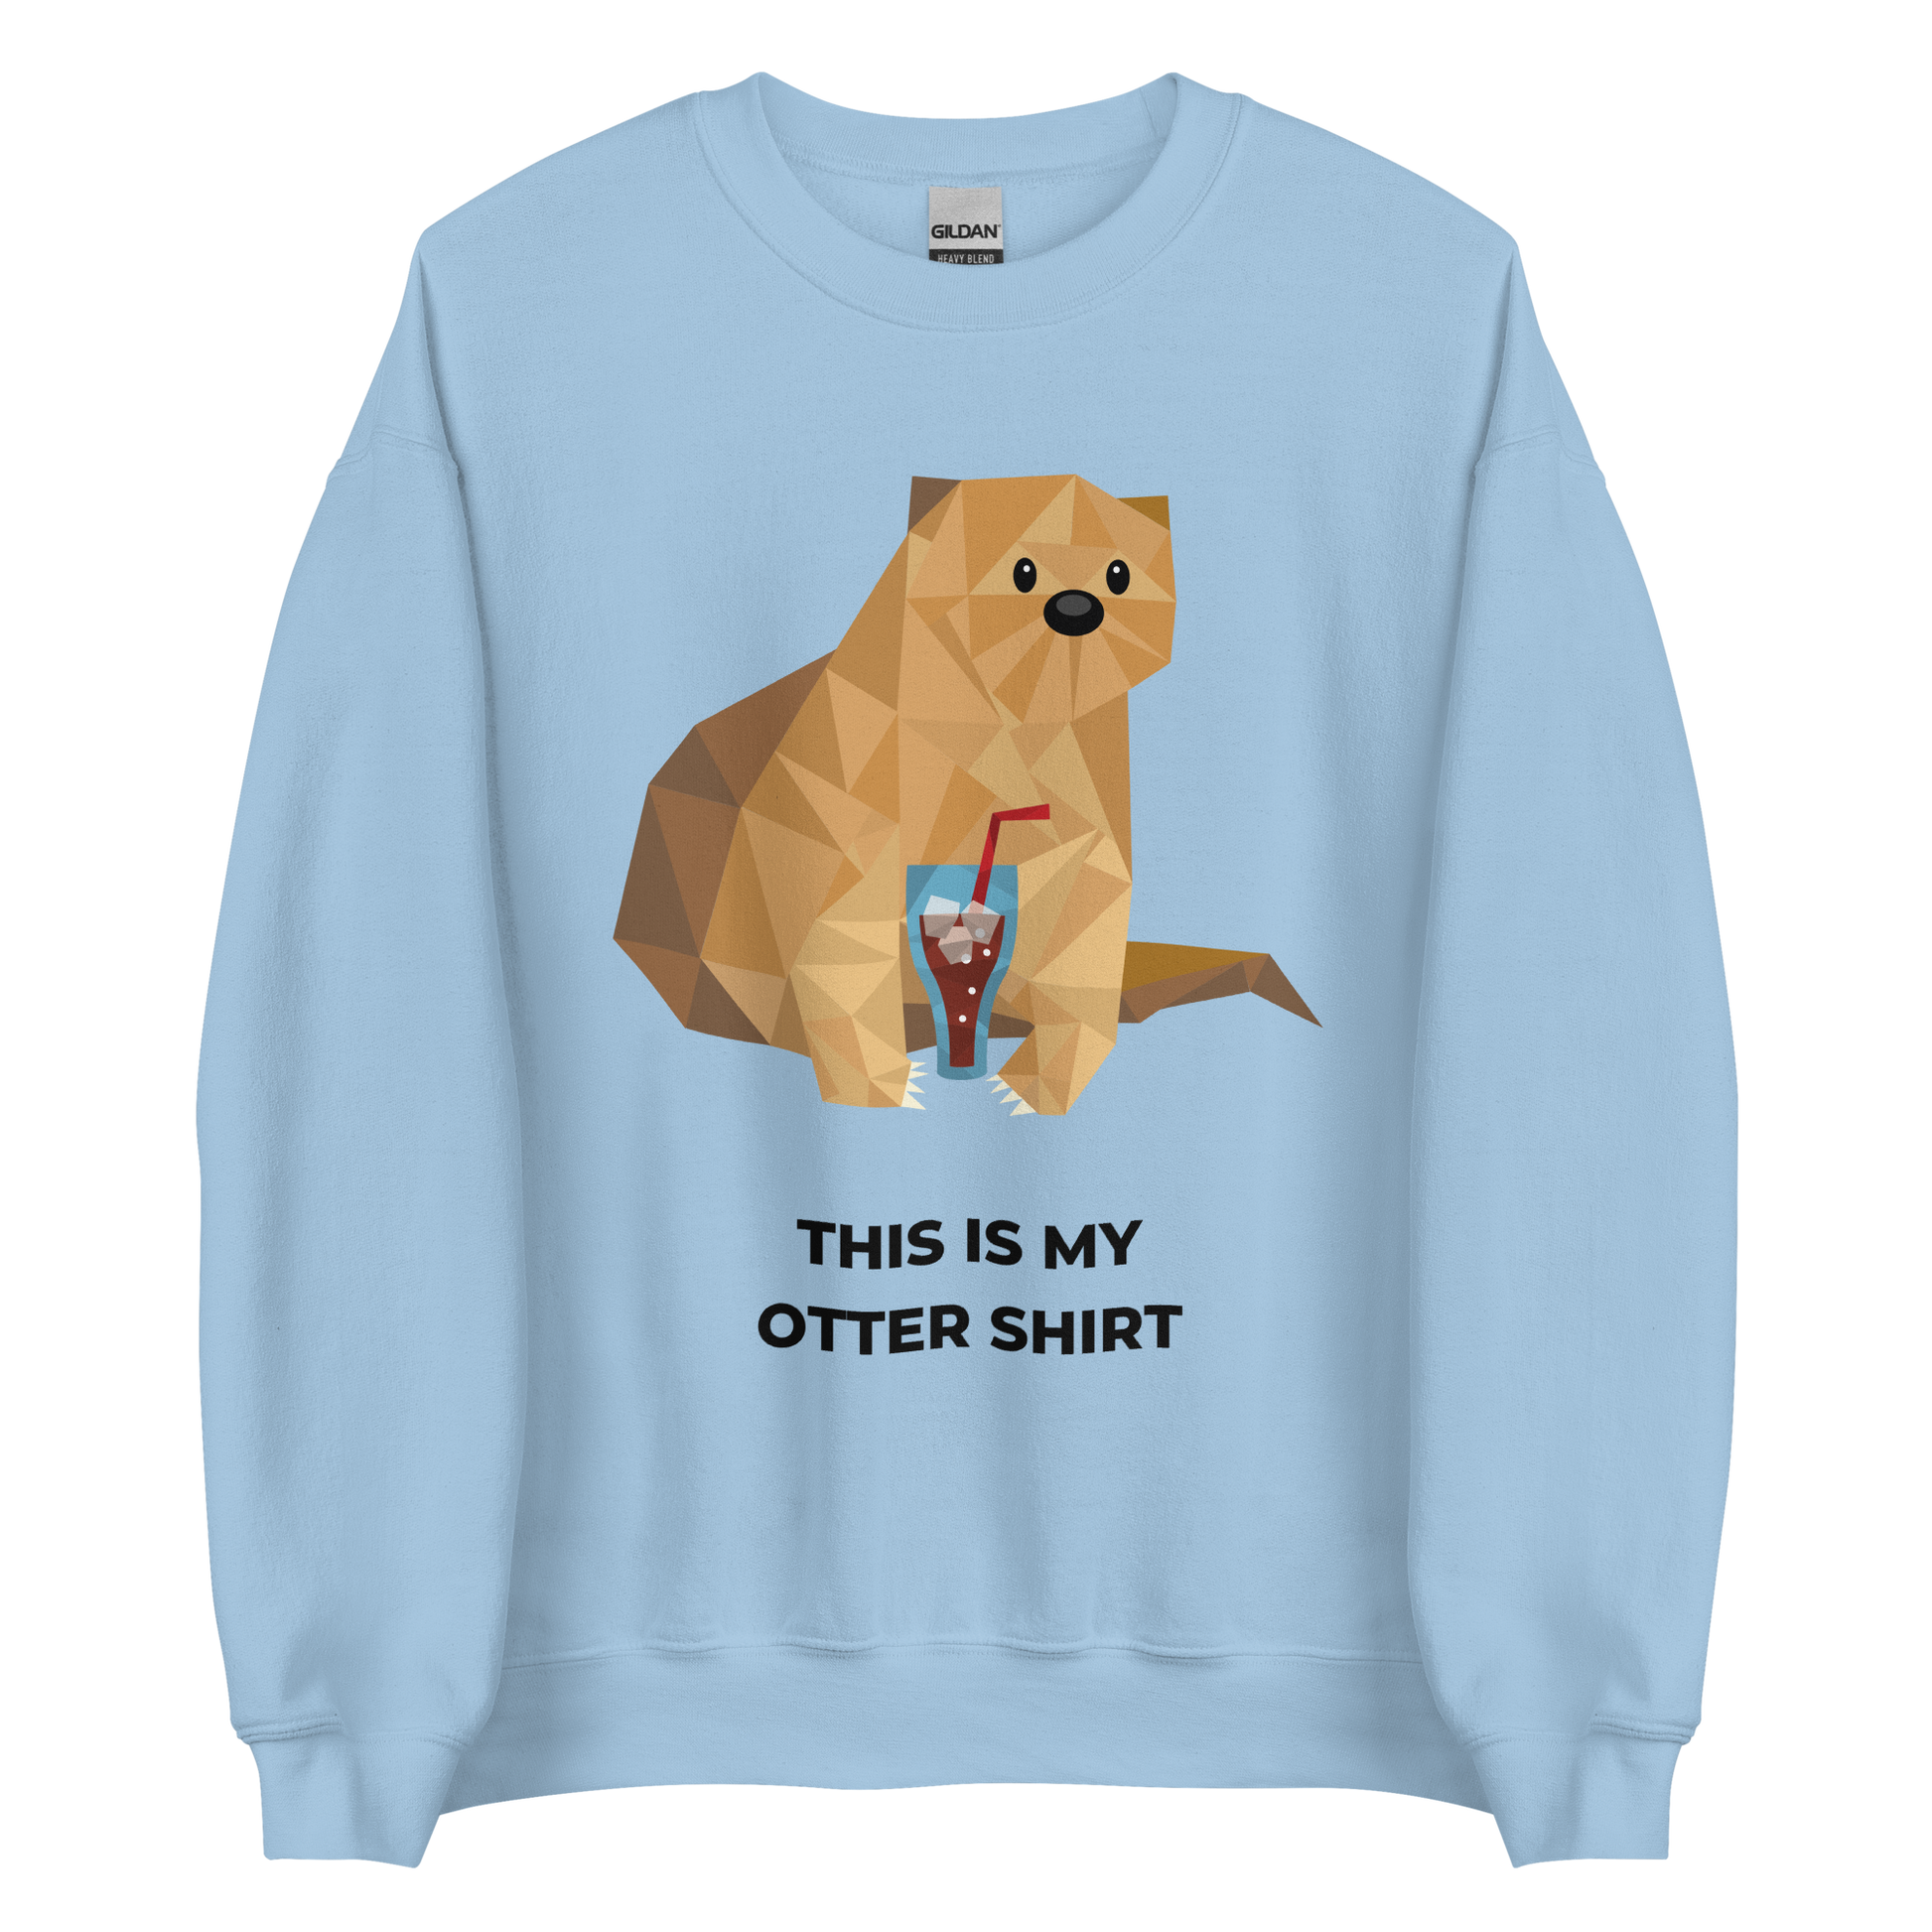 Light Blue Otter Sweatshirt featuring an adorable This Is My Otter Shirt graphic on the chest - Funny Graphic Otter Sweatshirts - Boozy Fox